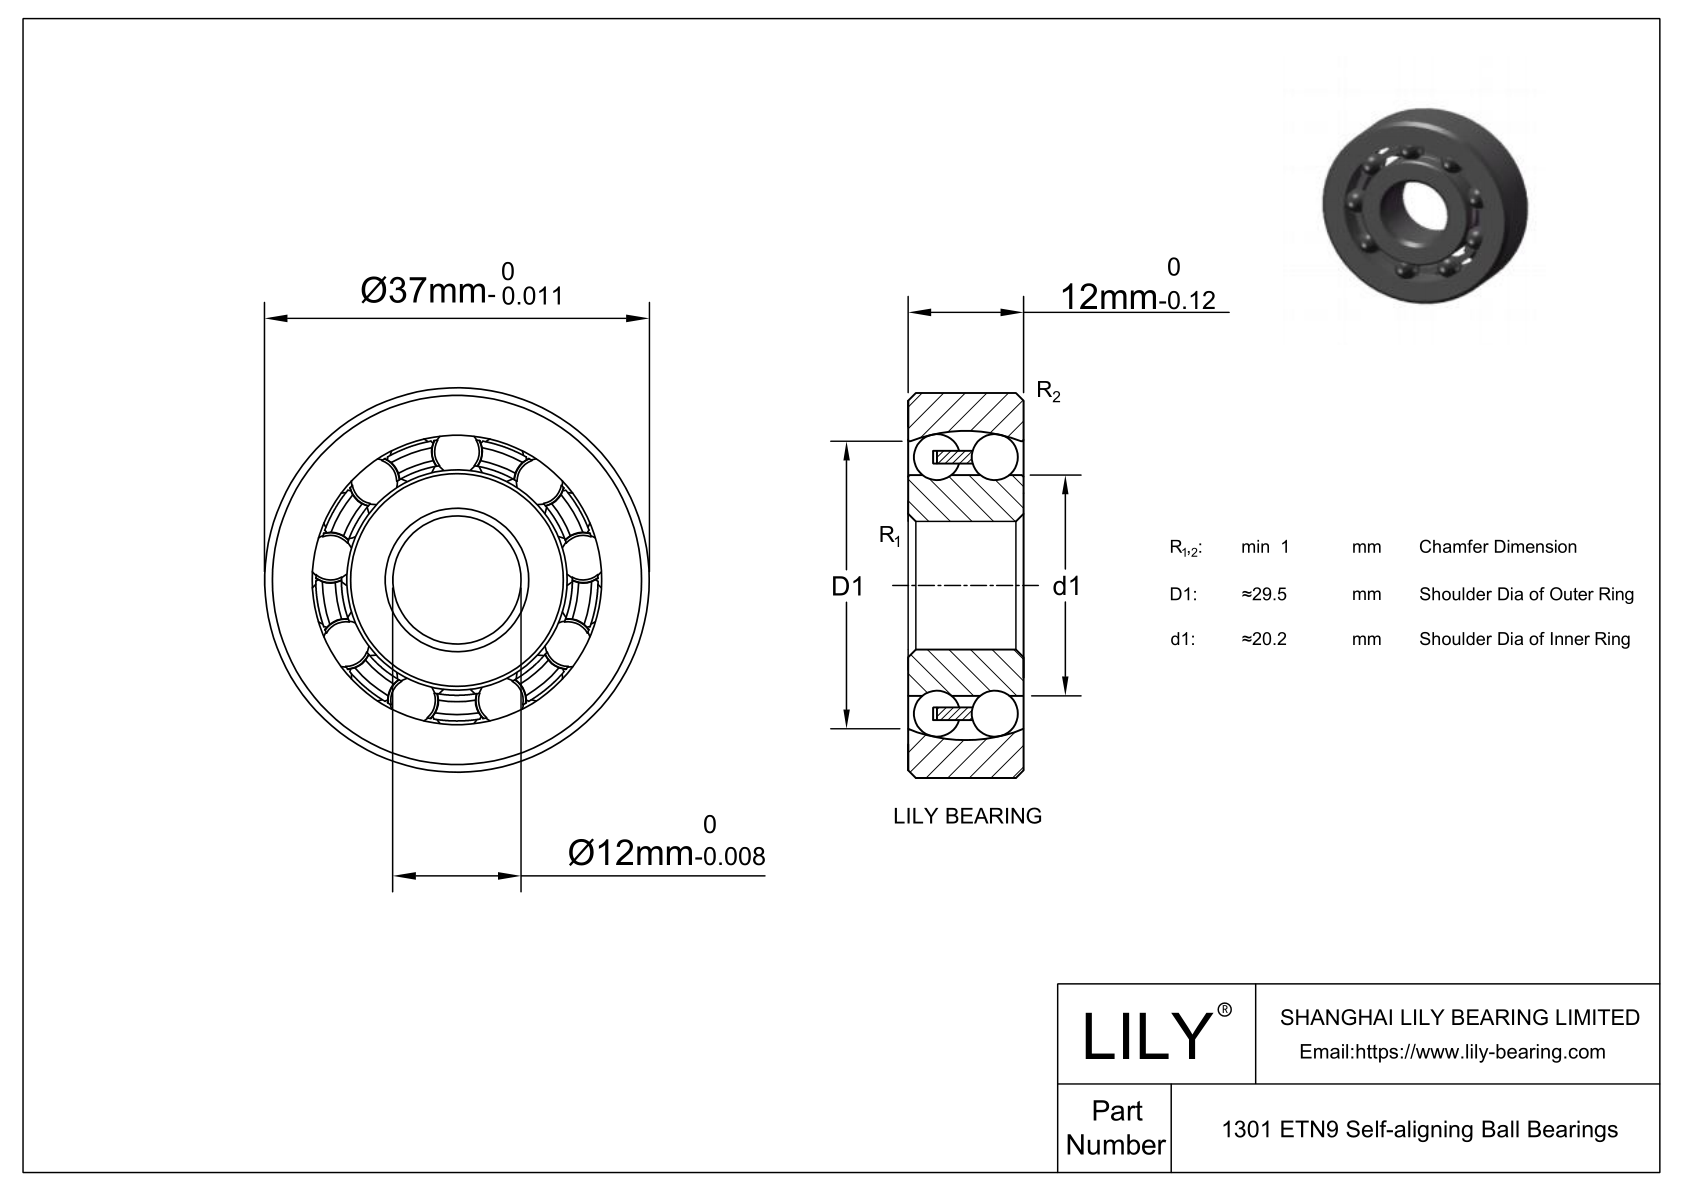 S1301 ETN9 Stainless Steel Self Aligning Ball Bearings cad drawing